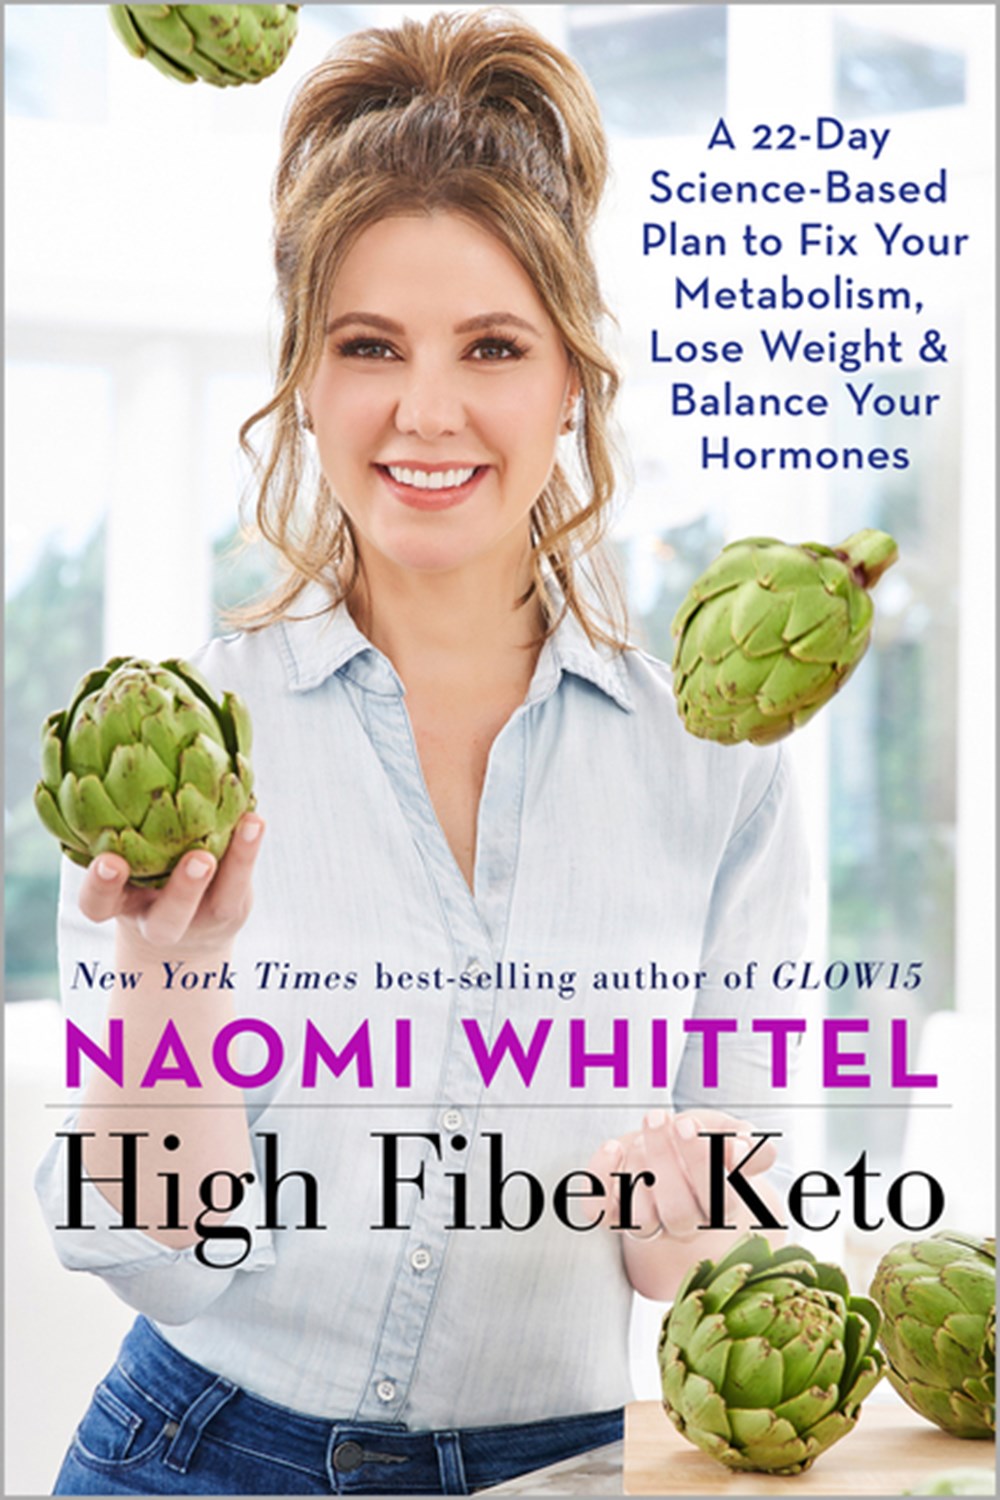 High Fiber Keto: A 22-Day Science-Based Plan to Fix Your Metabolism, Lose Weight & Balance Your Horm